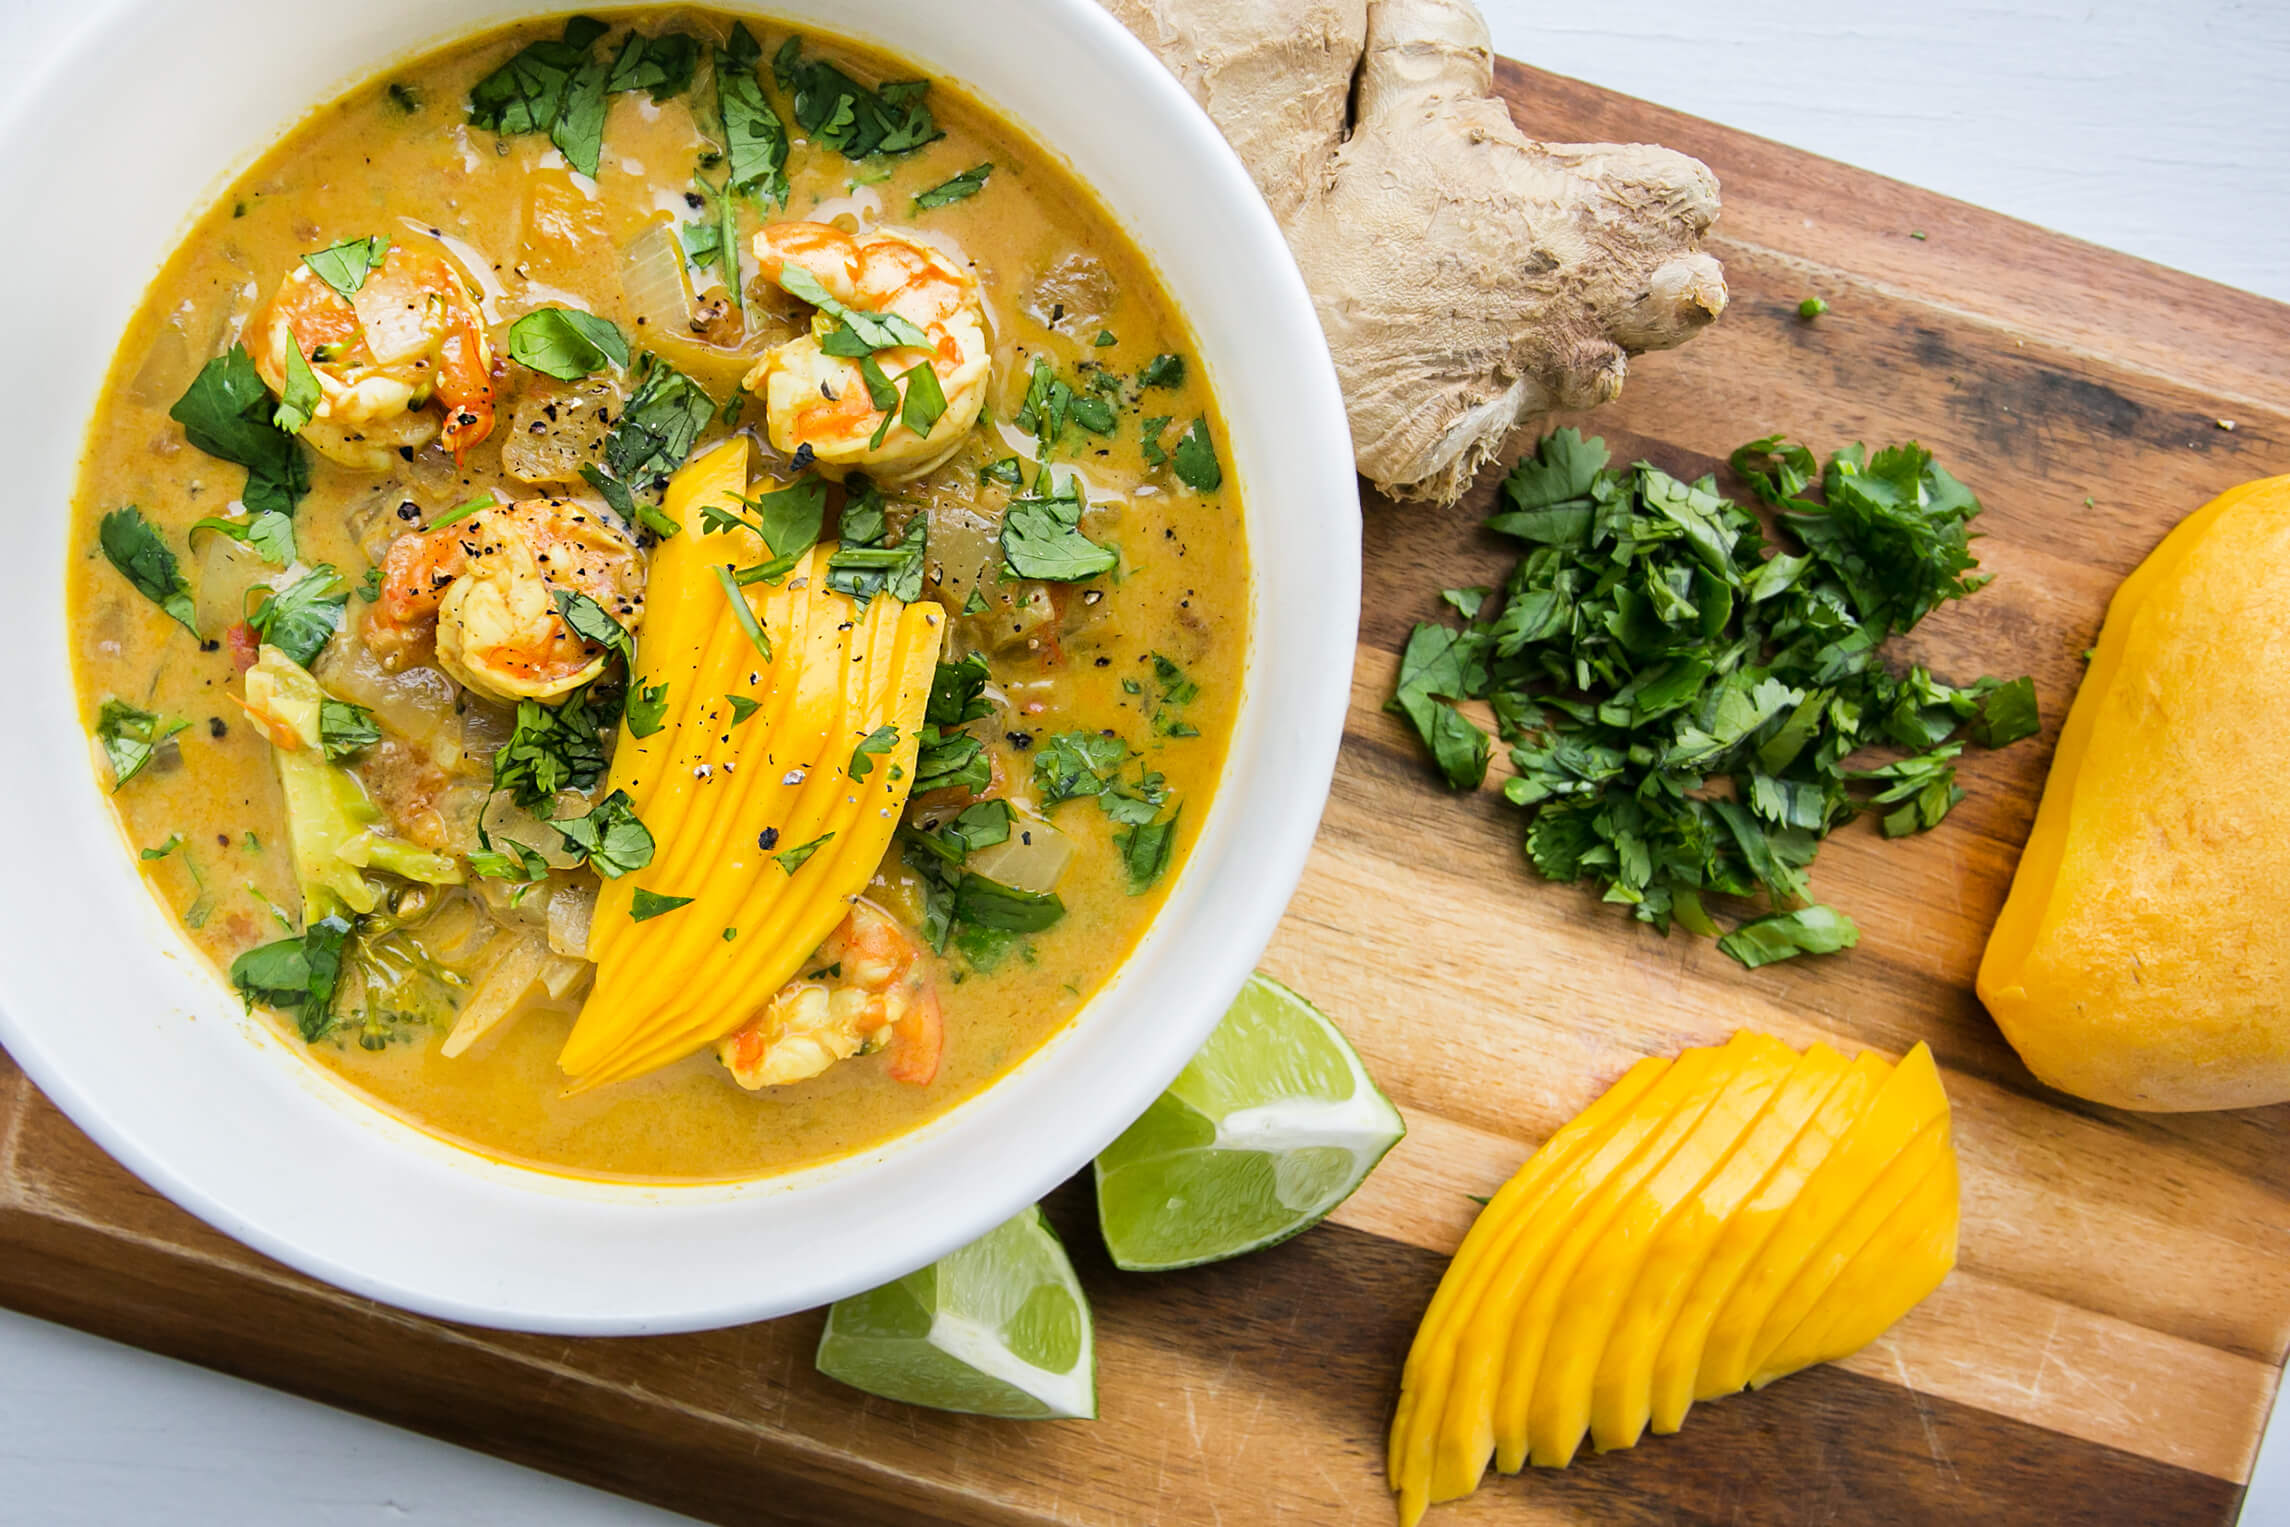 20 Specific Carbohydrate Diet Meals to Help Clients With Inflammatory Bowel Disease: Shrimp & Mango Coconut Curry